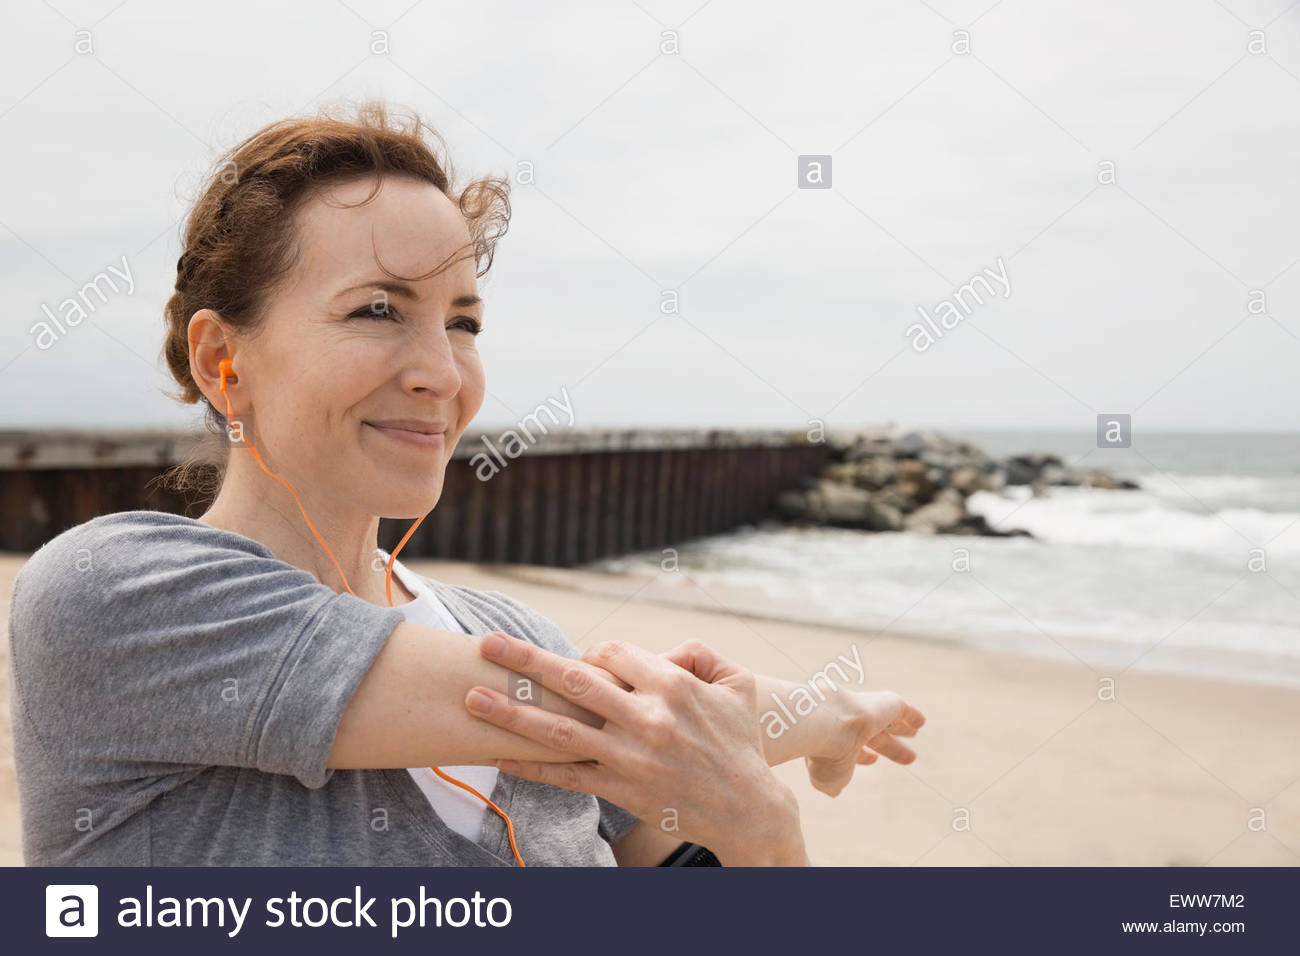 Smiling woman stretching arm on beach Stock Photo